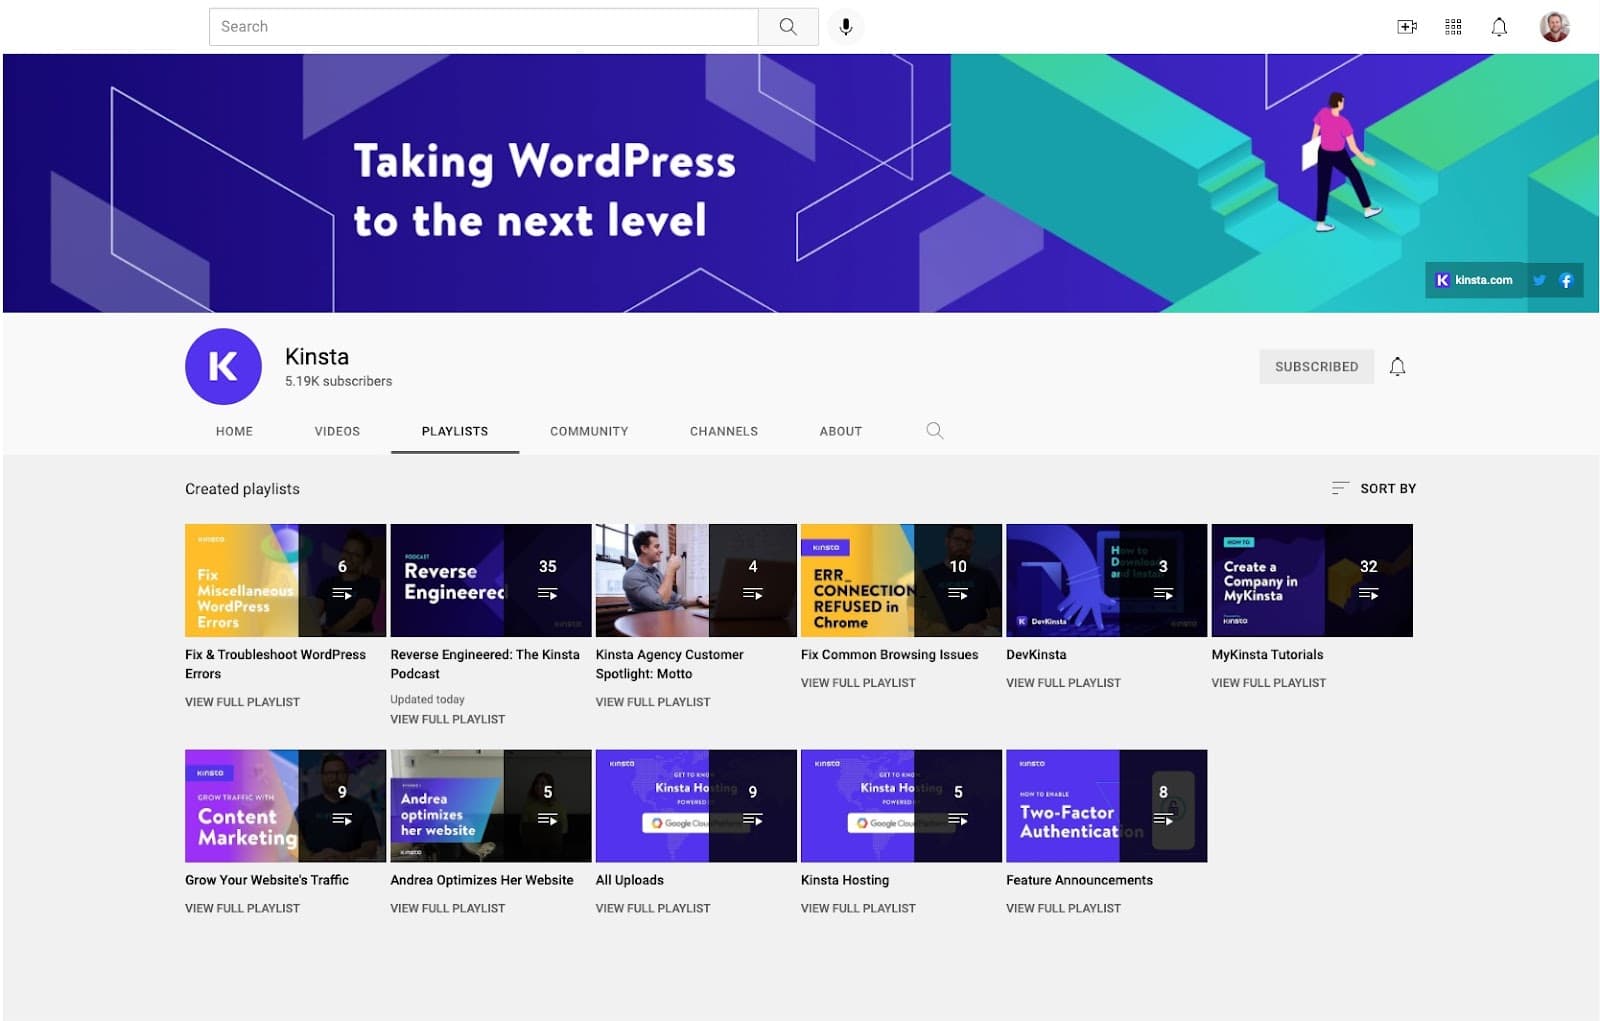 A screenshot of Kinsta's YouTube Channel with the headline 